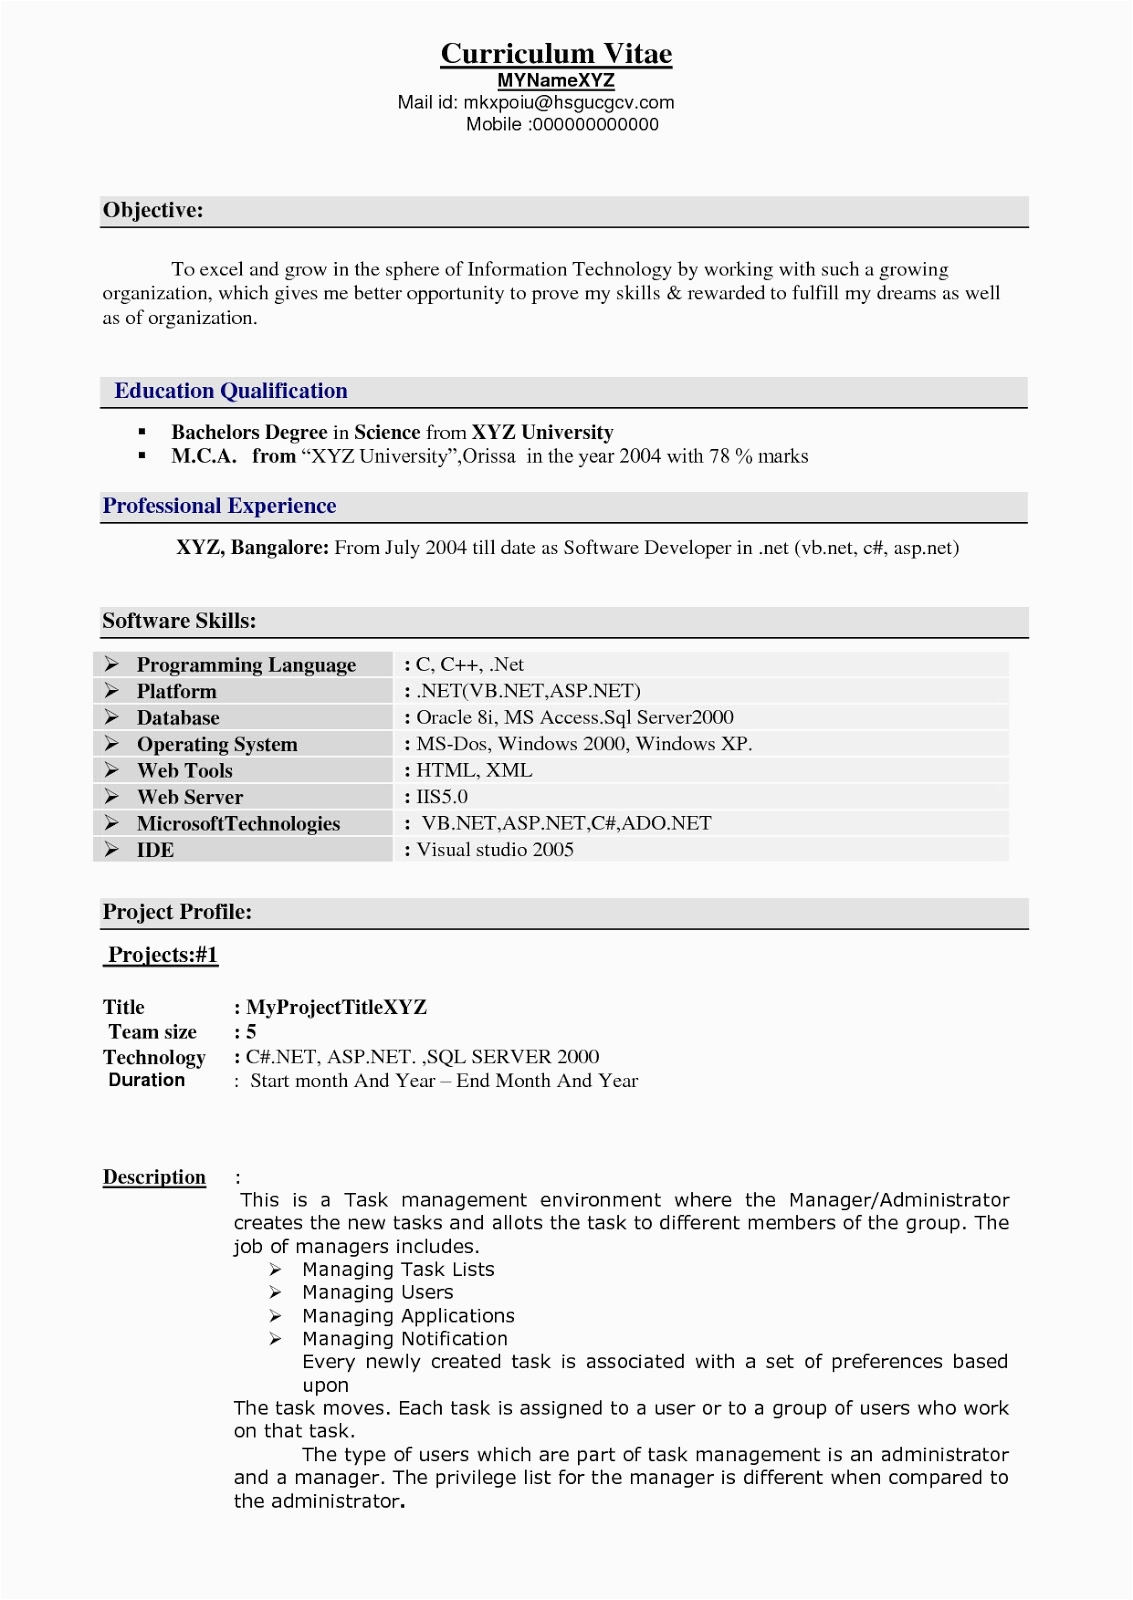 Sample Resume for 2 Years Experience In Net 2 Years Experience Resume Scribd India